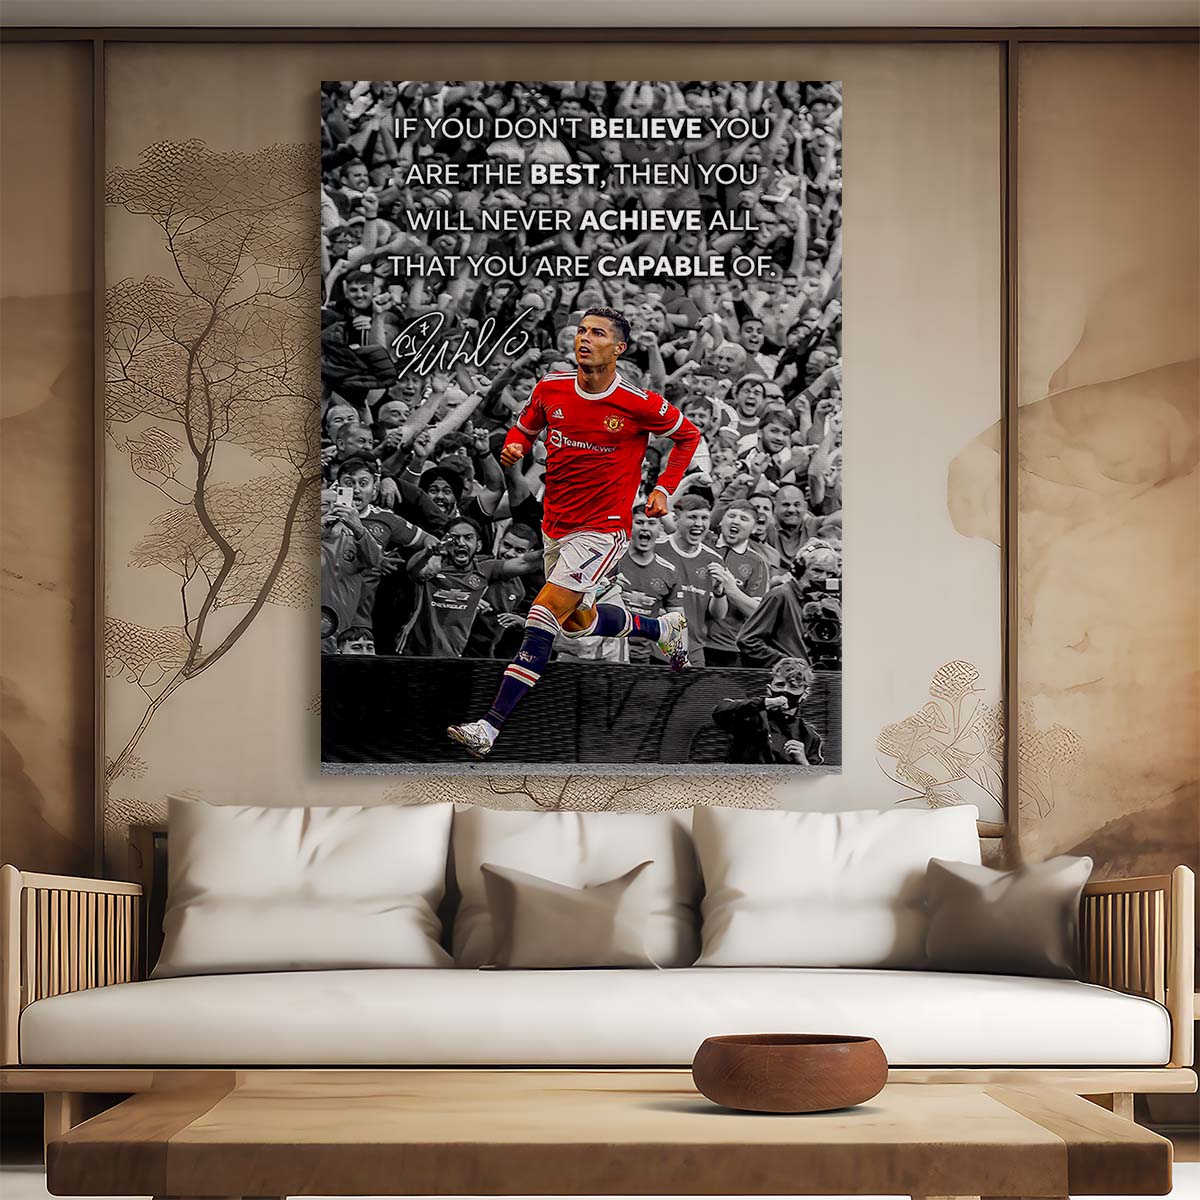 Ronaldo Believe in Yourself Wall Art by Luxuriance Designs. Made in USA.